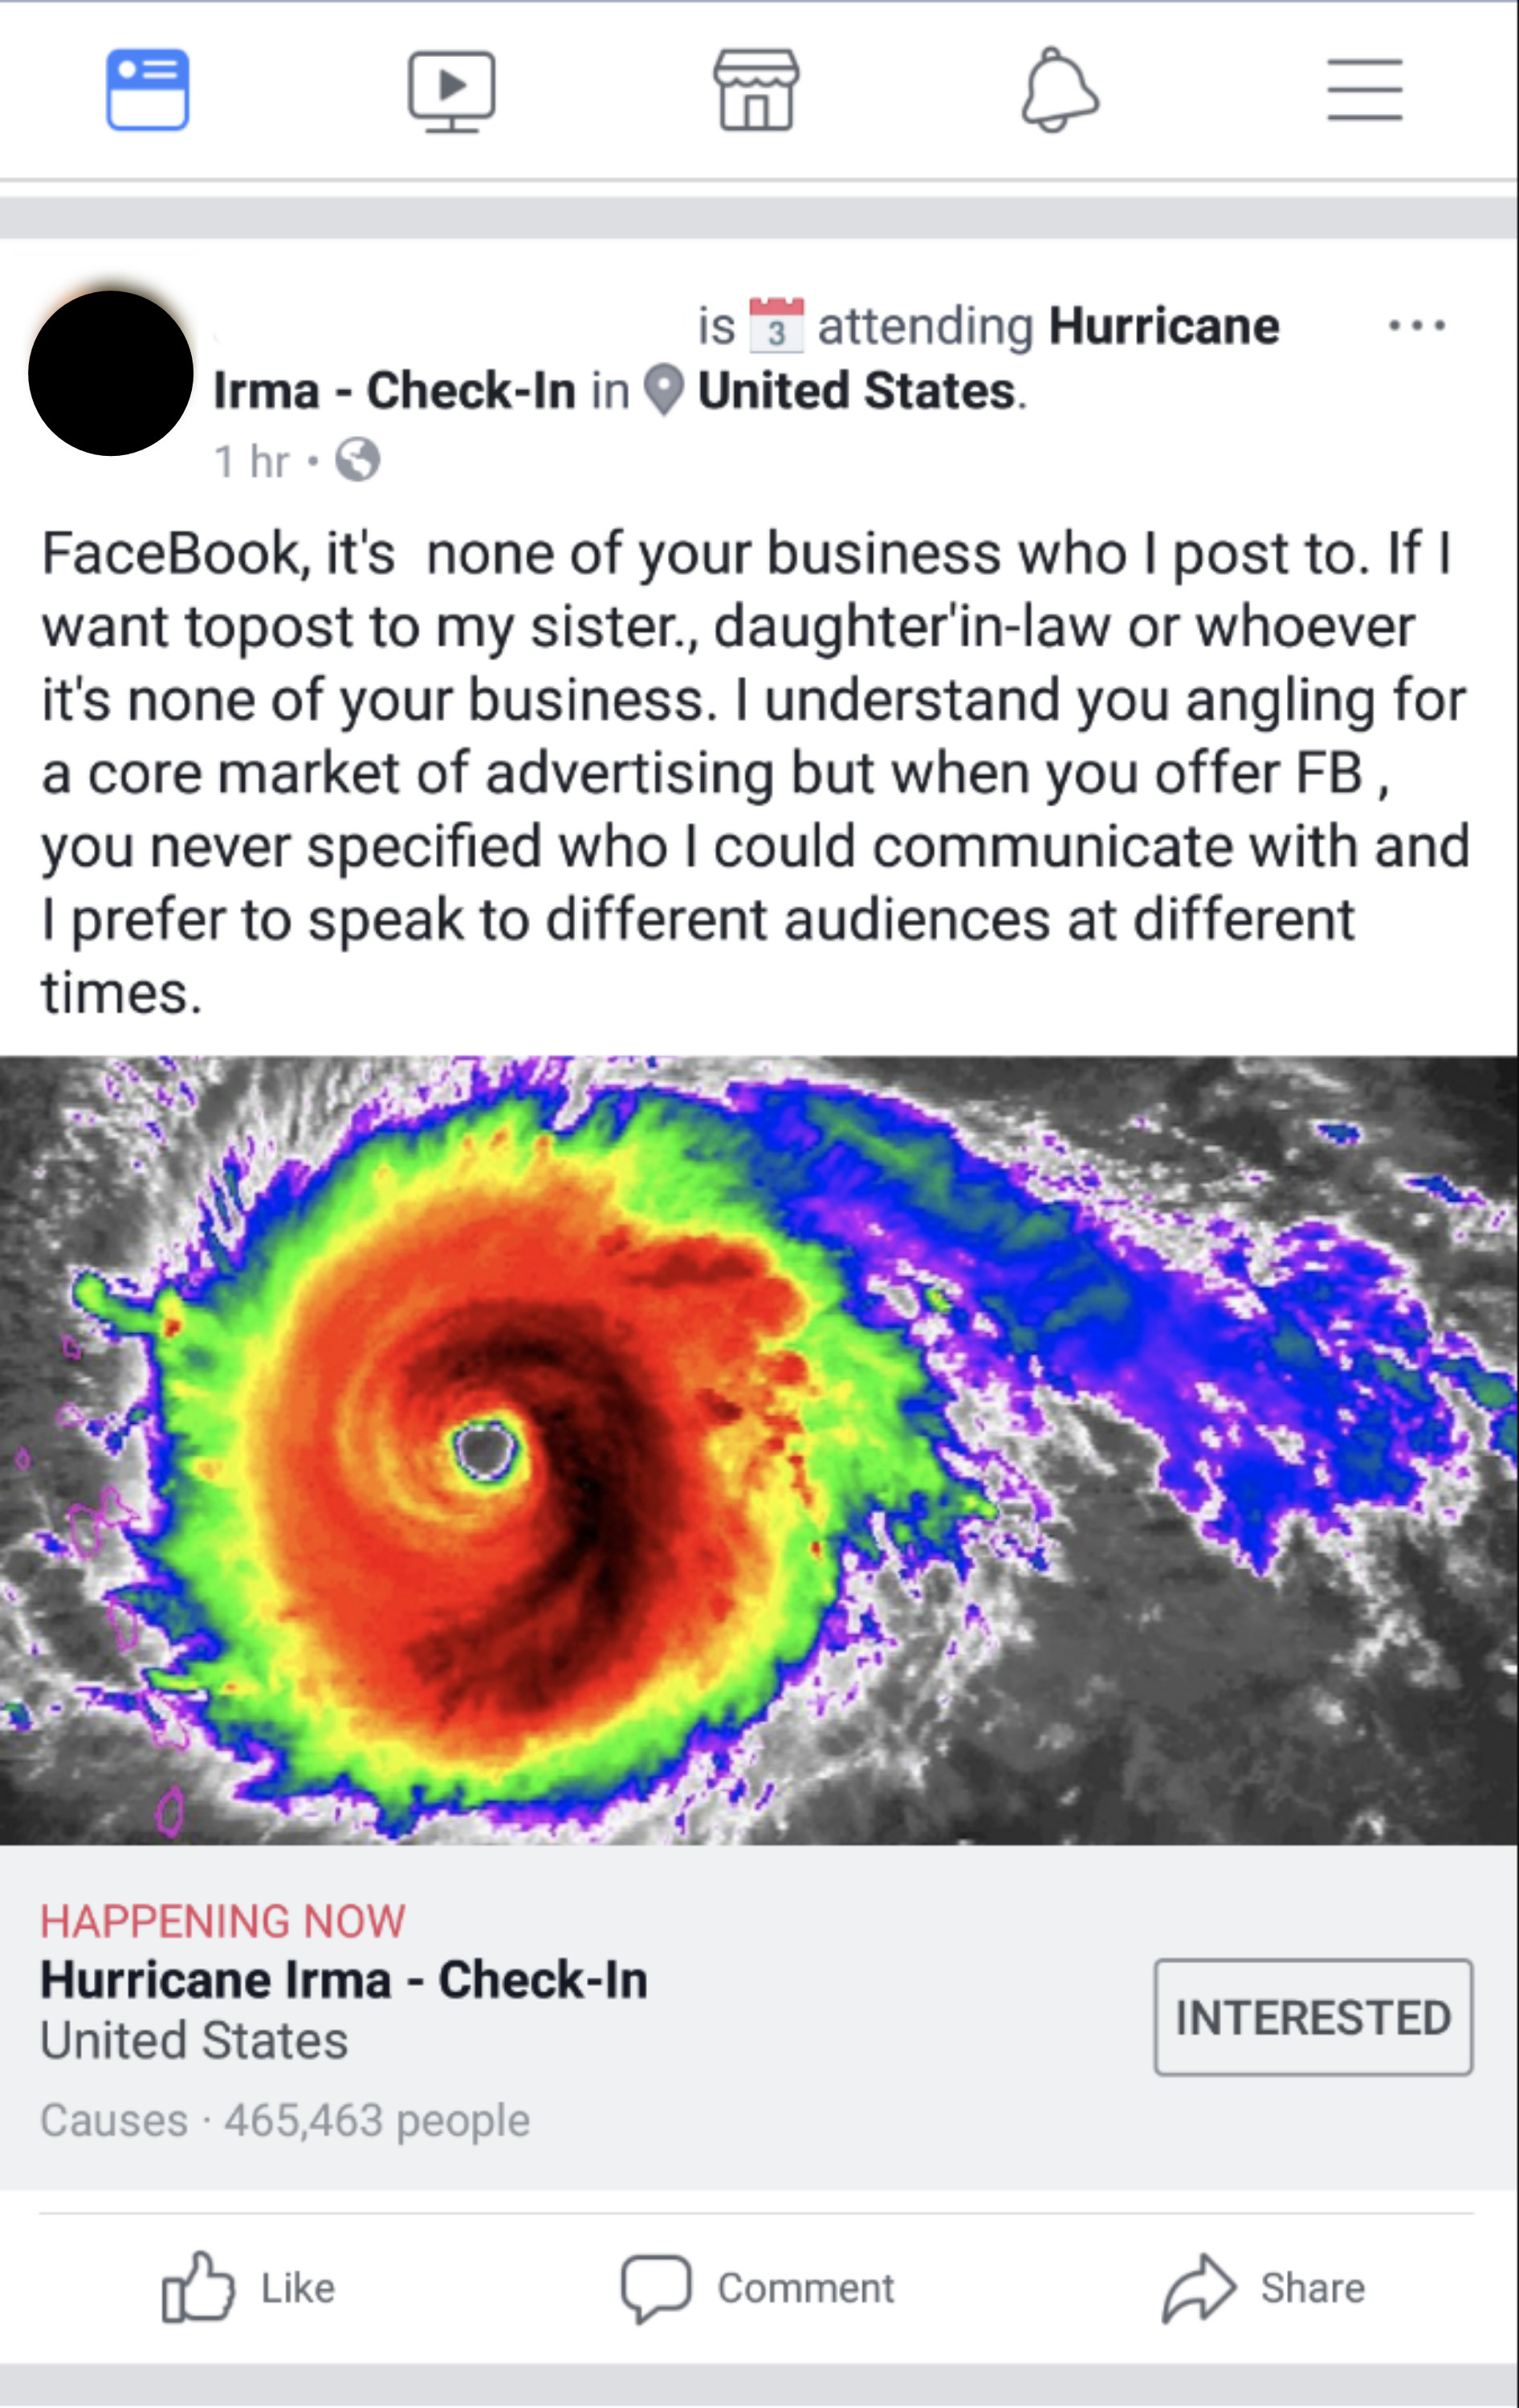 Grandpa complaining about a lack of privacy, while also checking in to Hurricane Irma